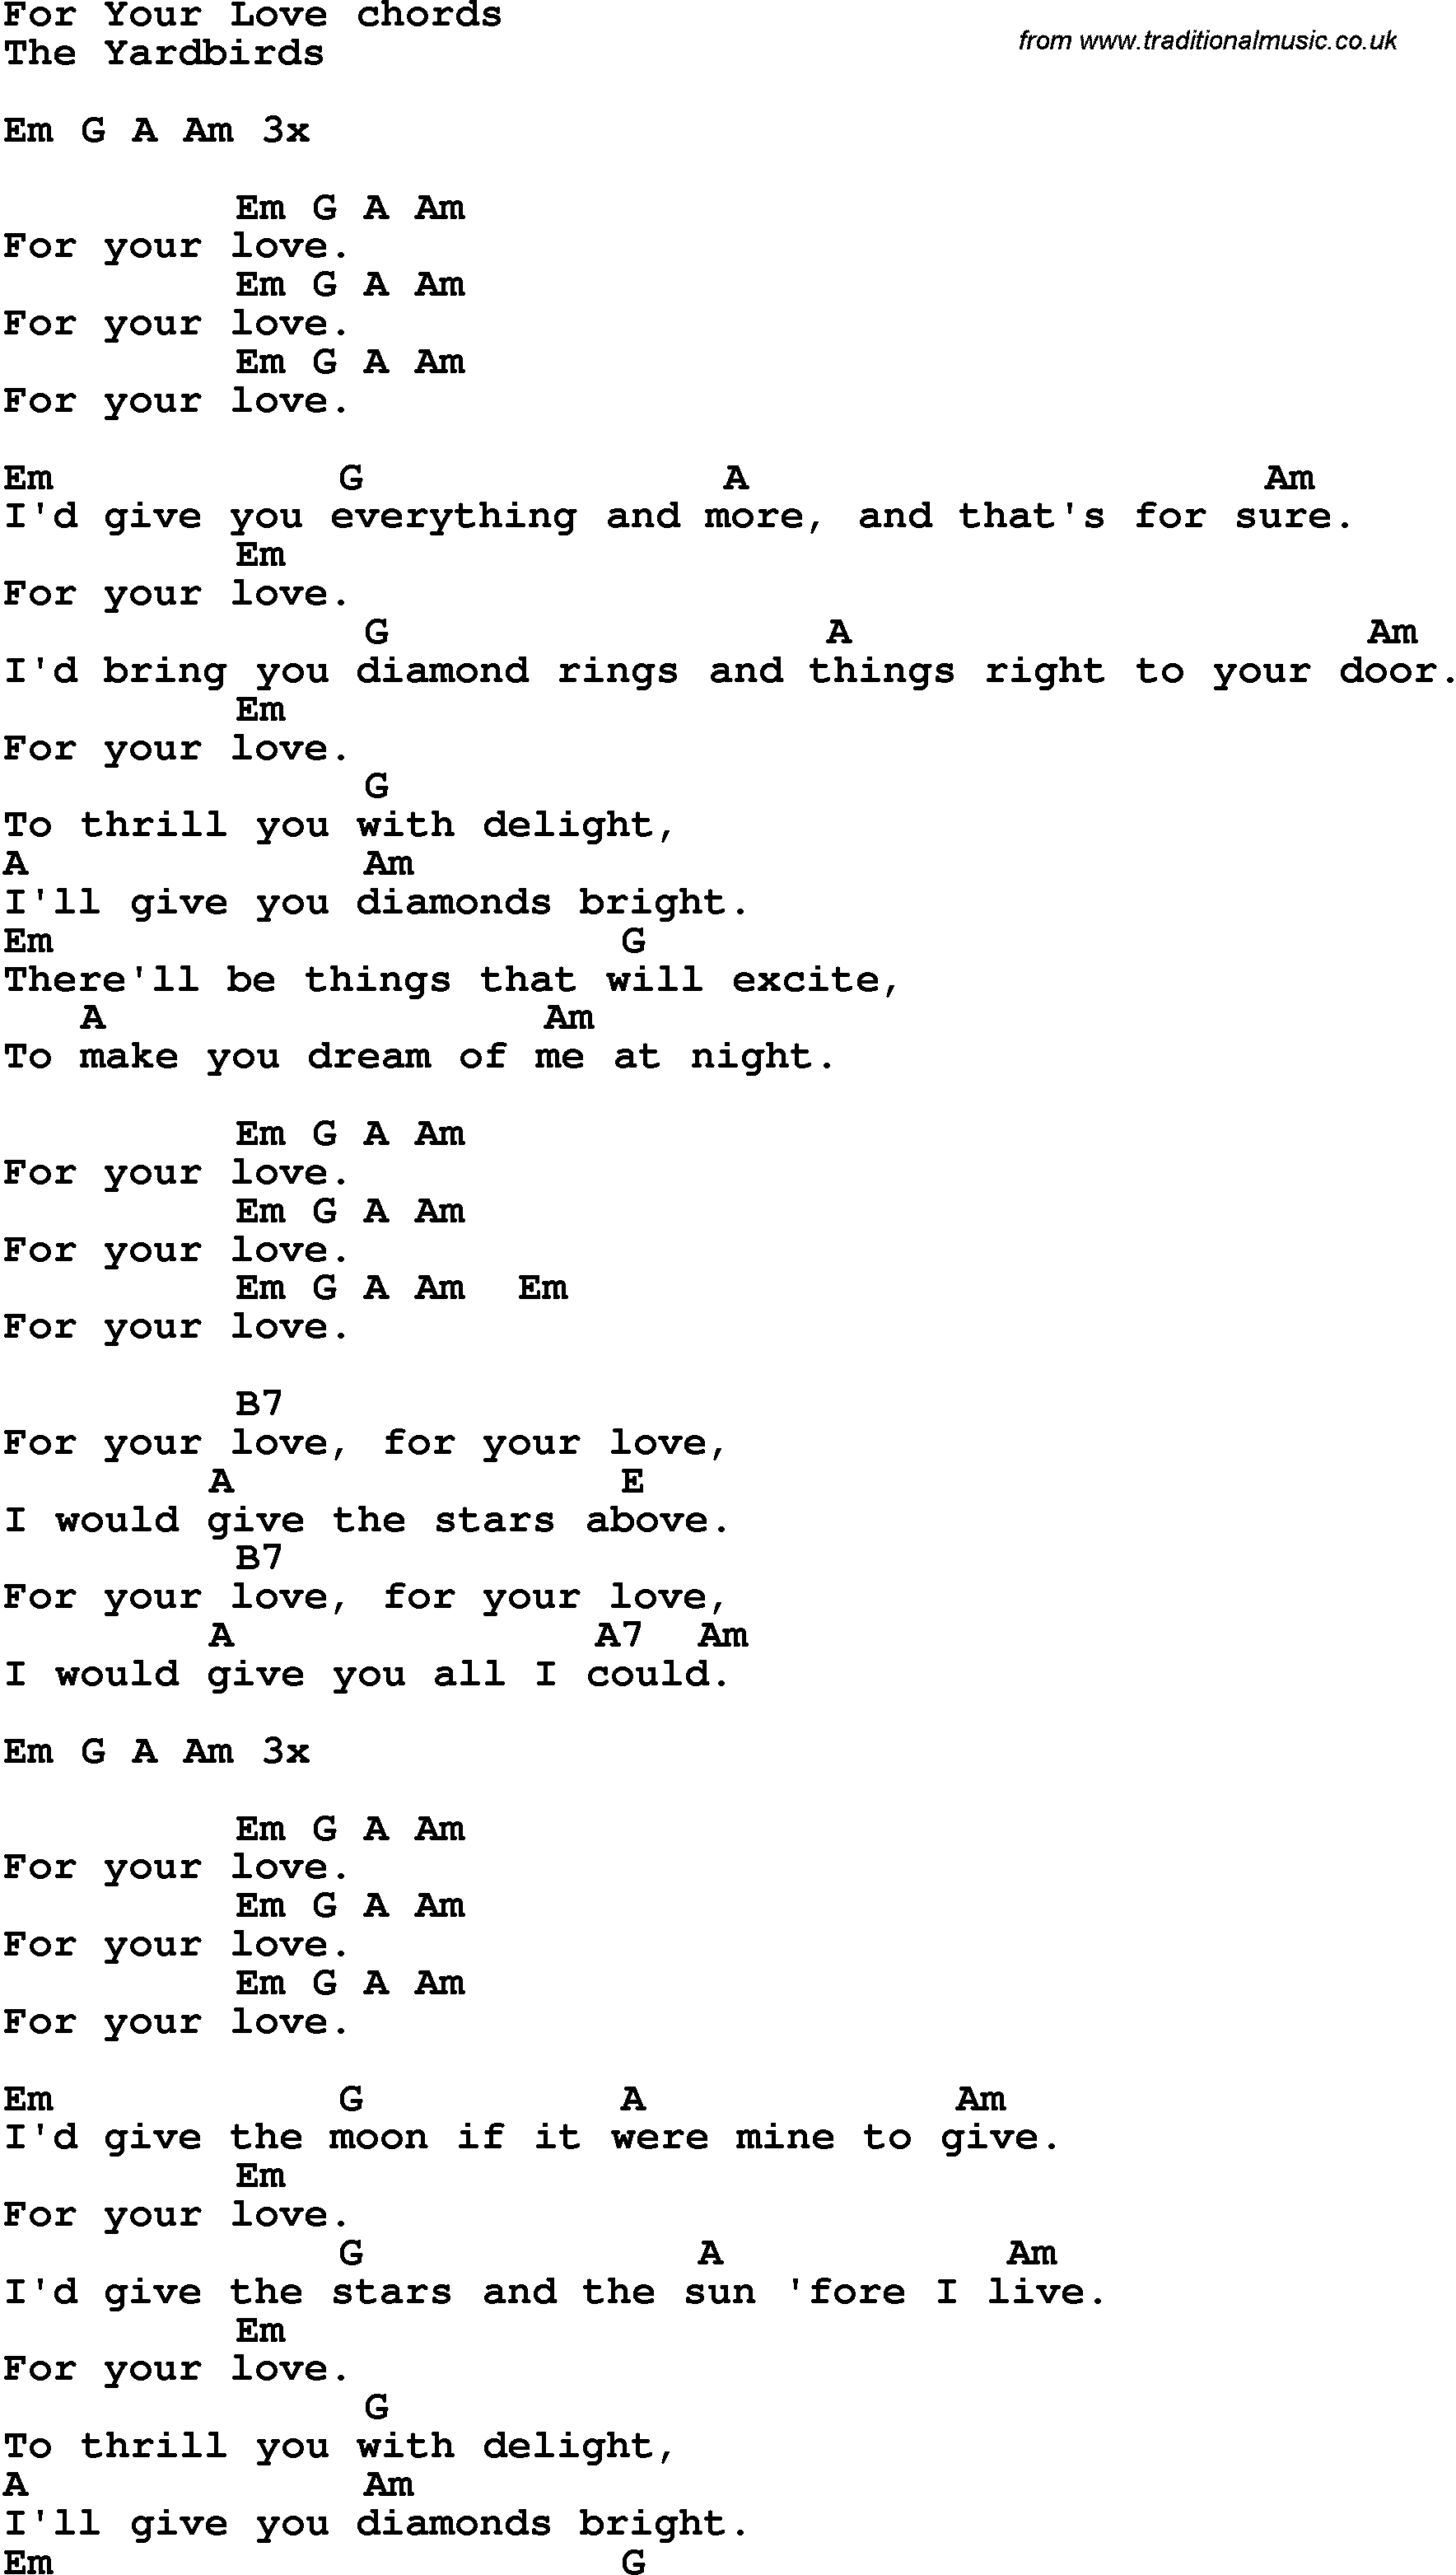 Song Lyrics with guitar chords for For Your Love